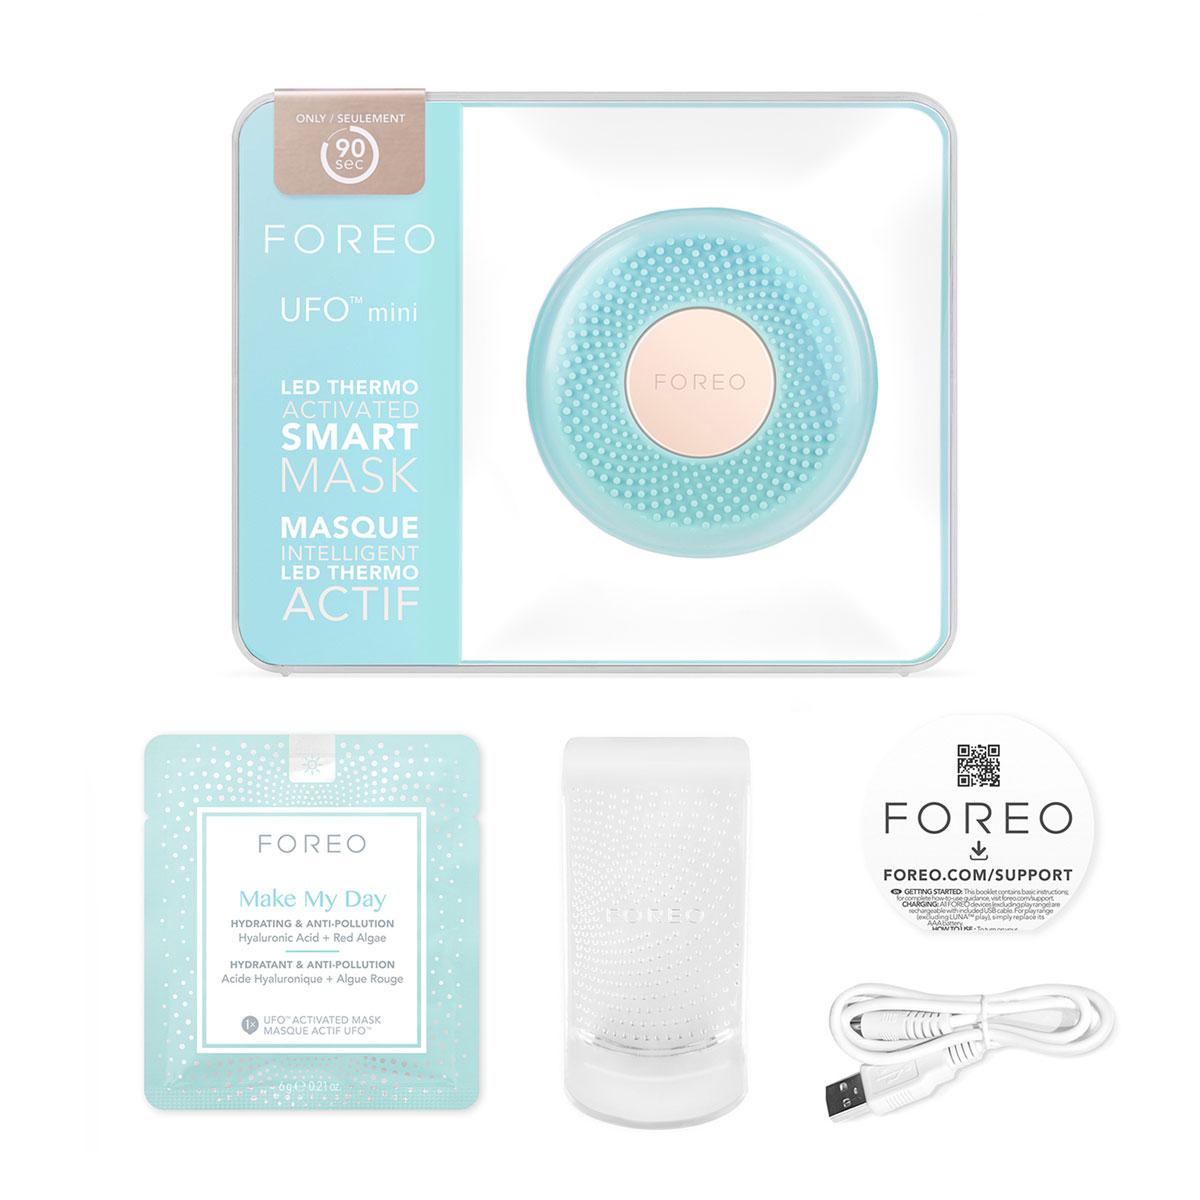 FOREO UFO Mini Device For Accelerating Face Mask Effects - Mint - USB